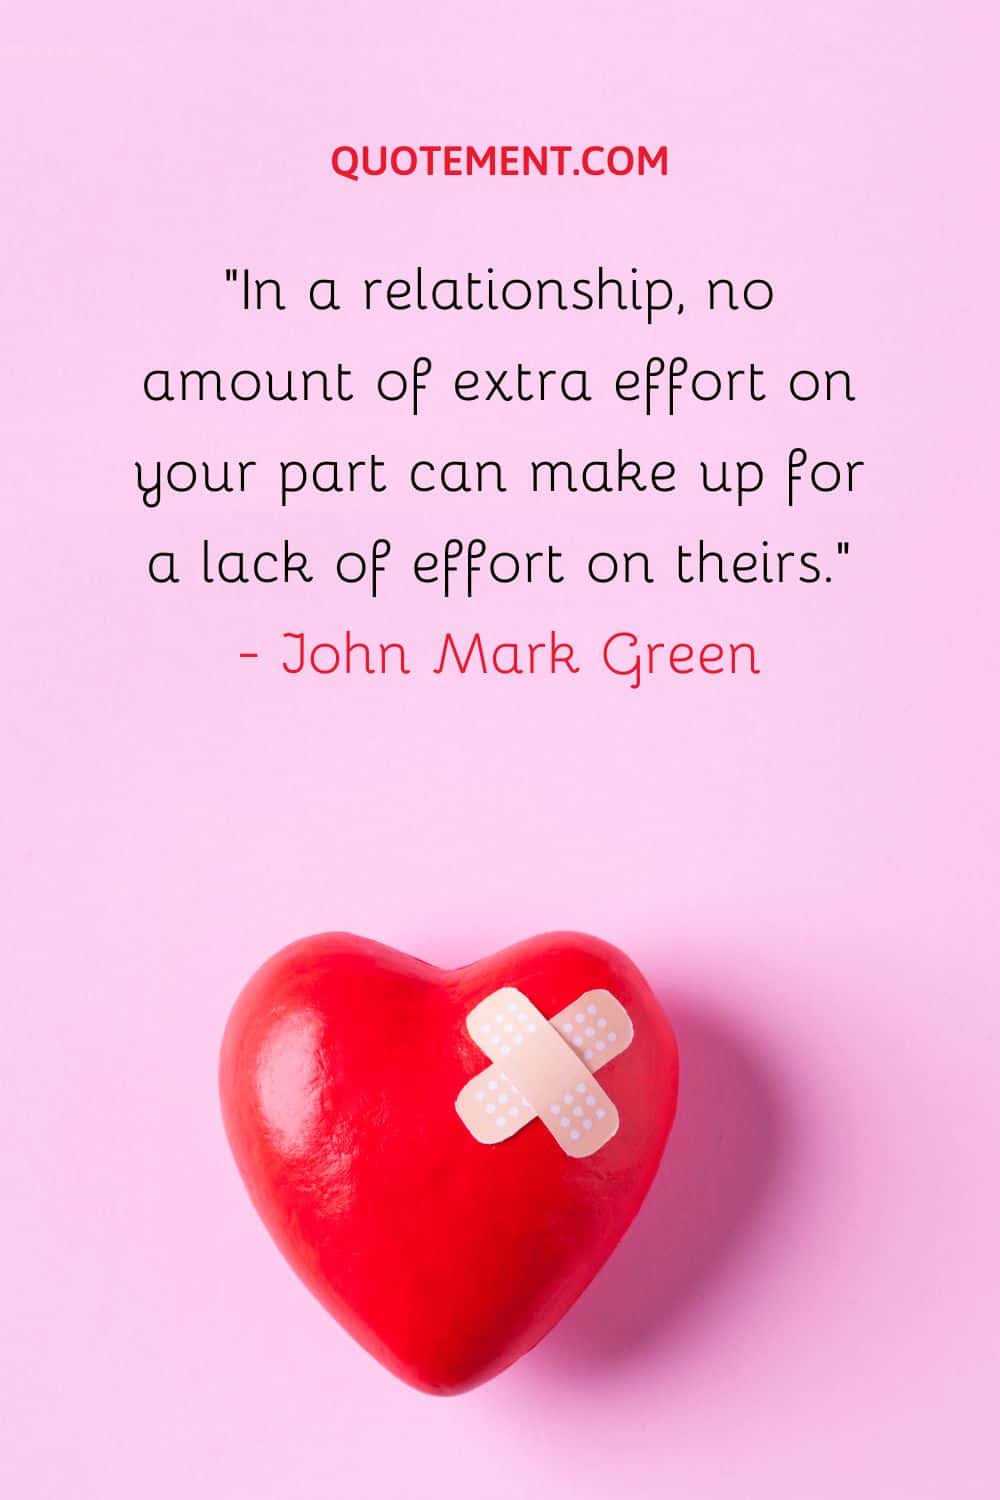 In a relationship, no amount of extra effort on your part can make up for a lack of effort on theirs